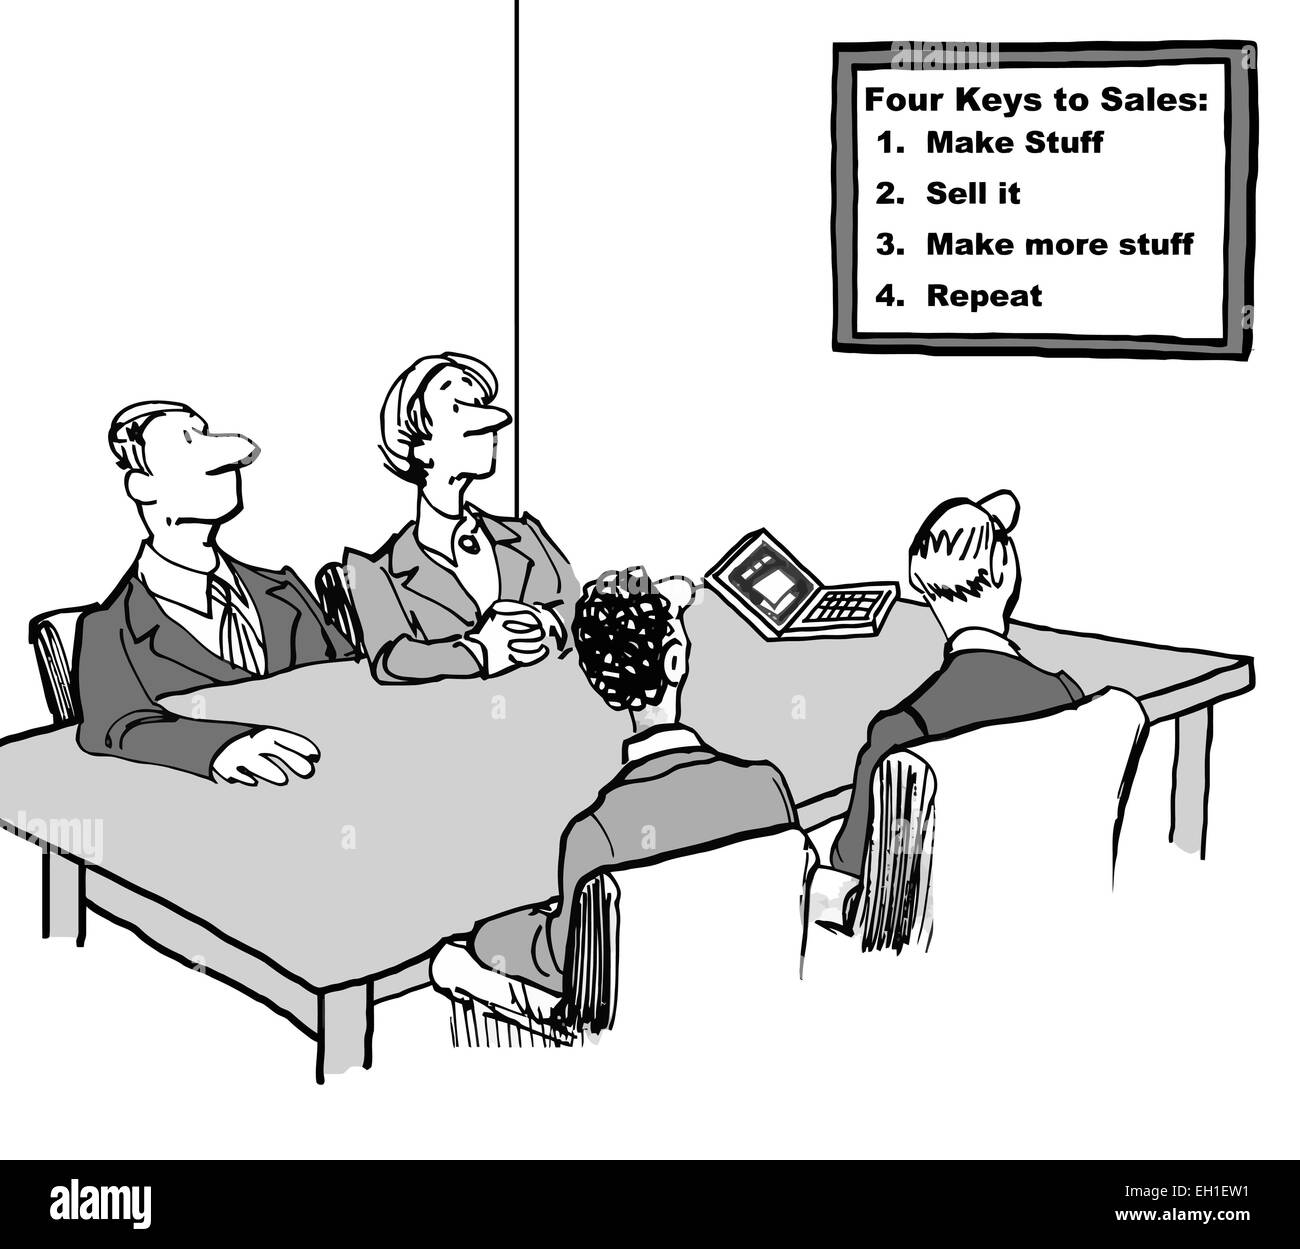 Cartoon of business team in meeting and looking at sign the says the Four Keys to Sales: make stuff, sell it, make more stuff... Stock Vector